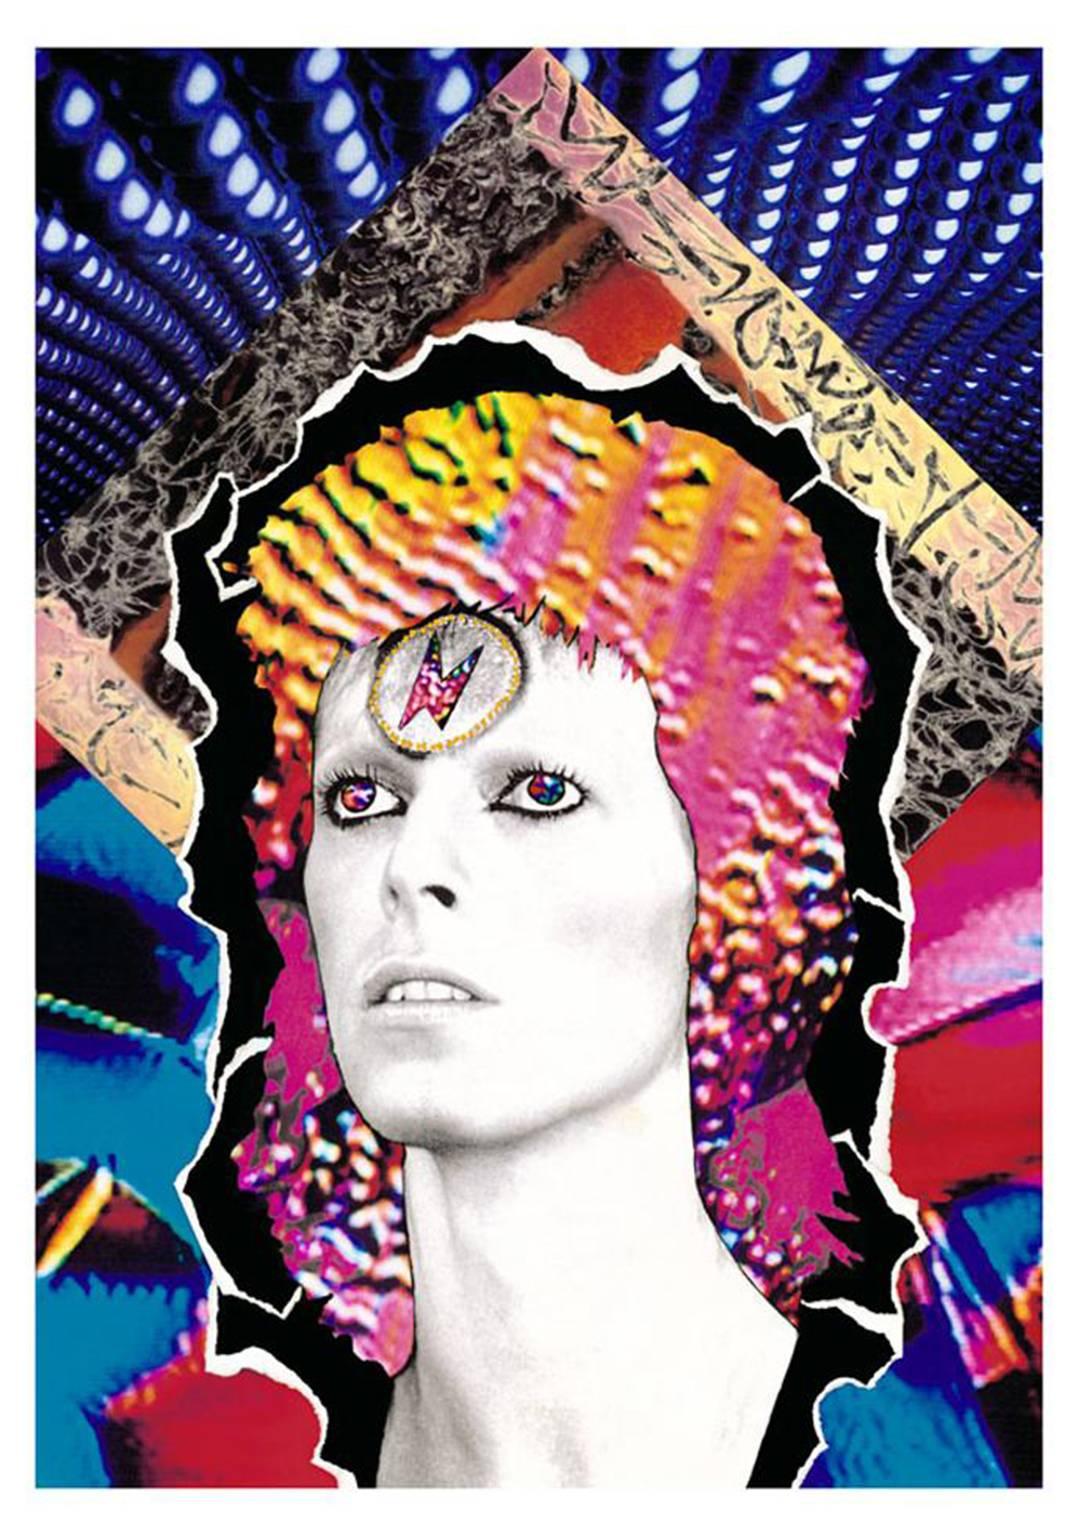 Mick Rock Abstract Photograph - David Bowie, 2008